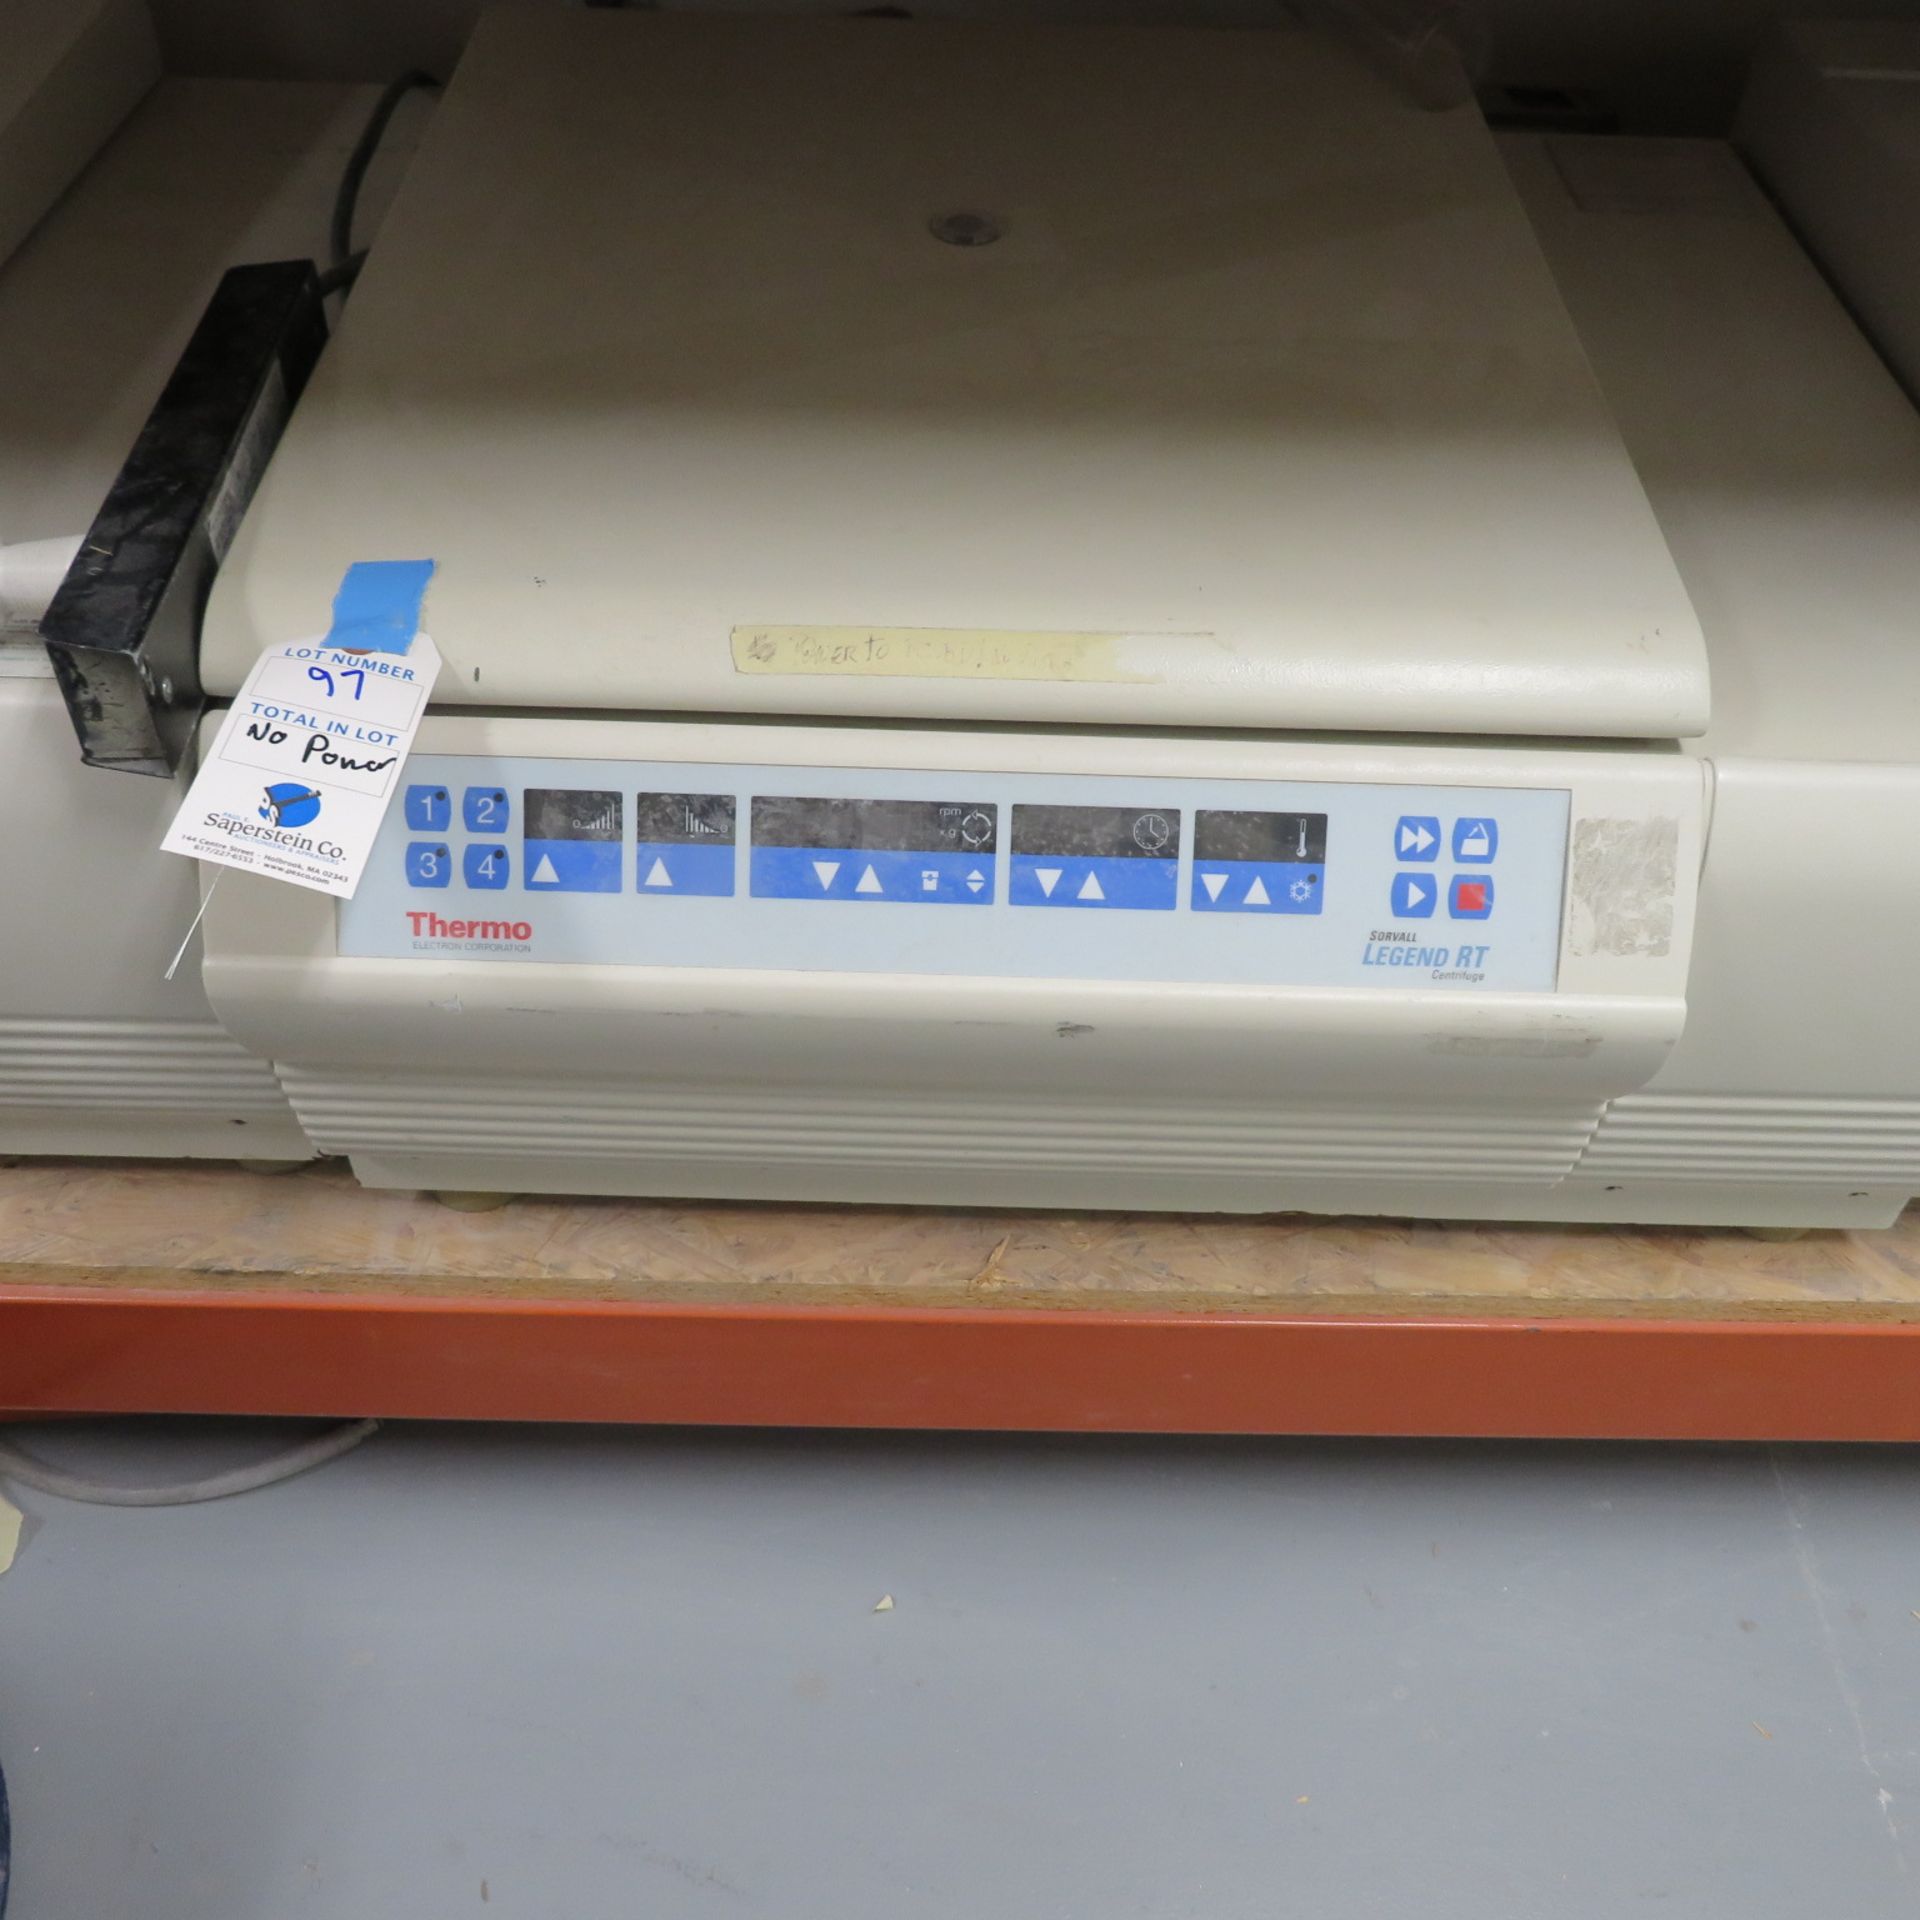 THERMO SORVALL LEGEND RT CENTRIFUGE-NO POWER